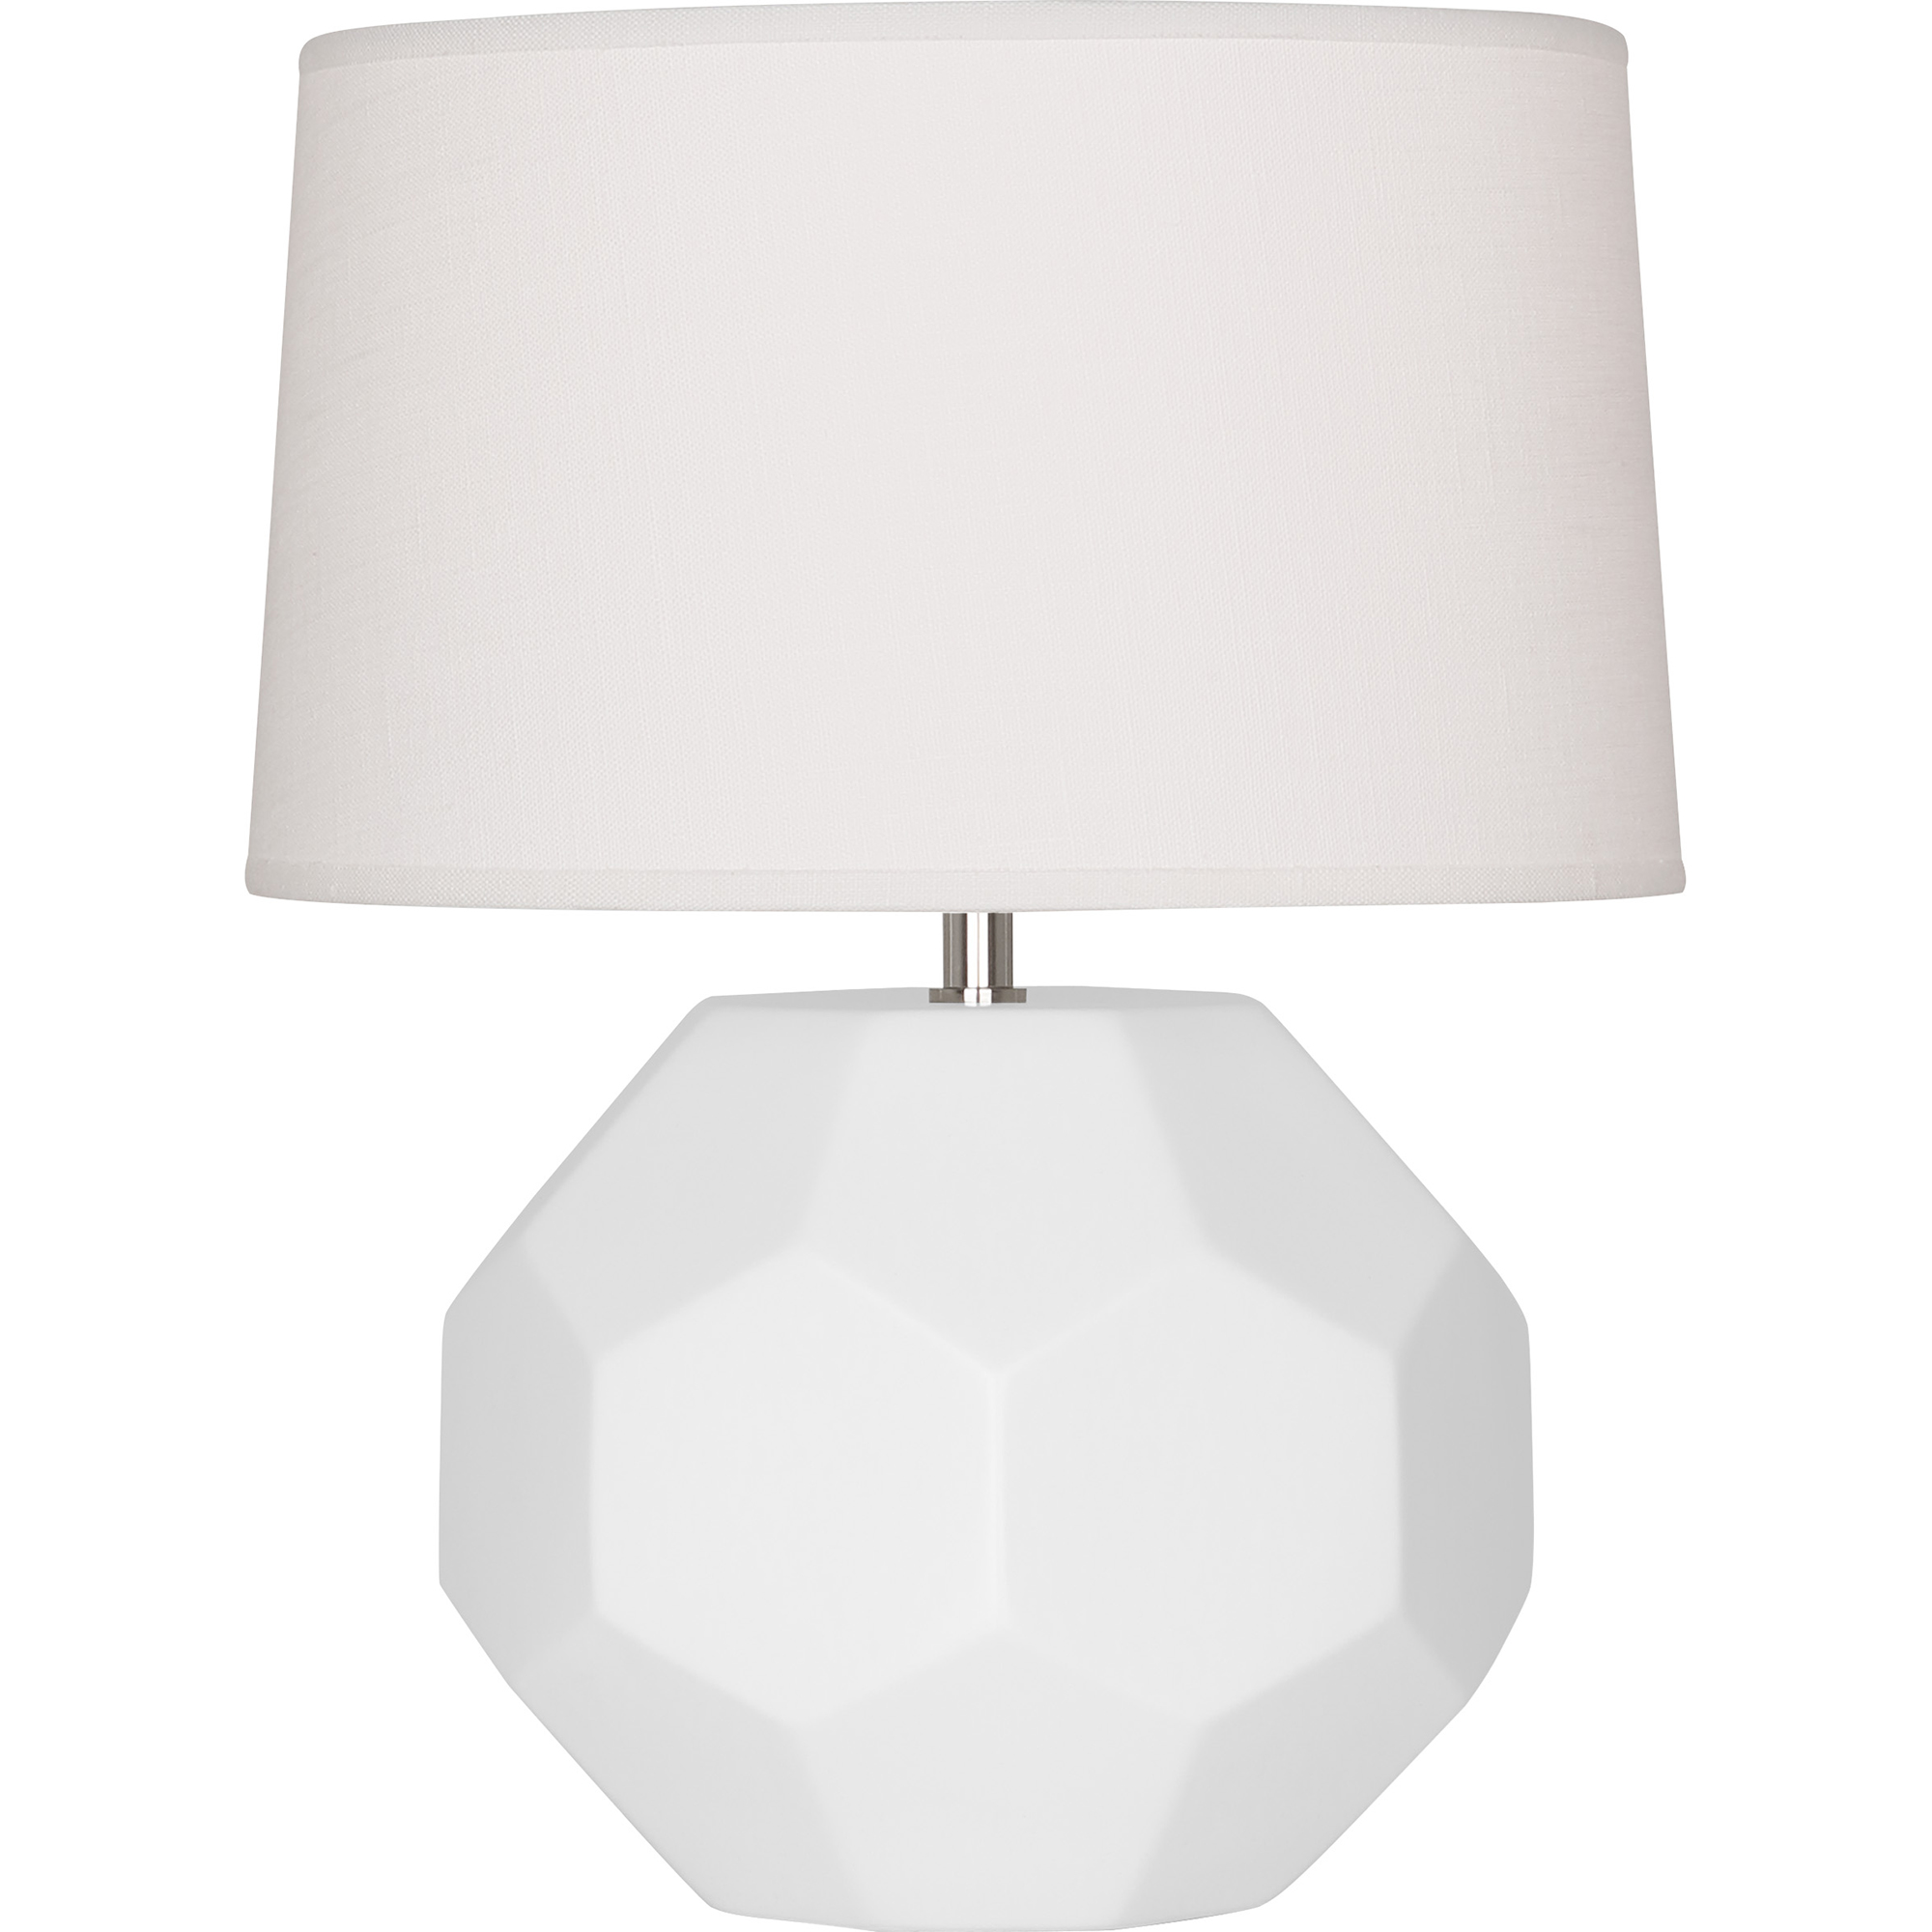 Franklin Accent Lamp Style #MDY02